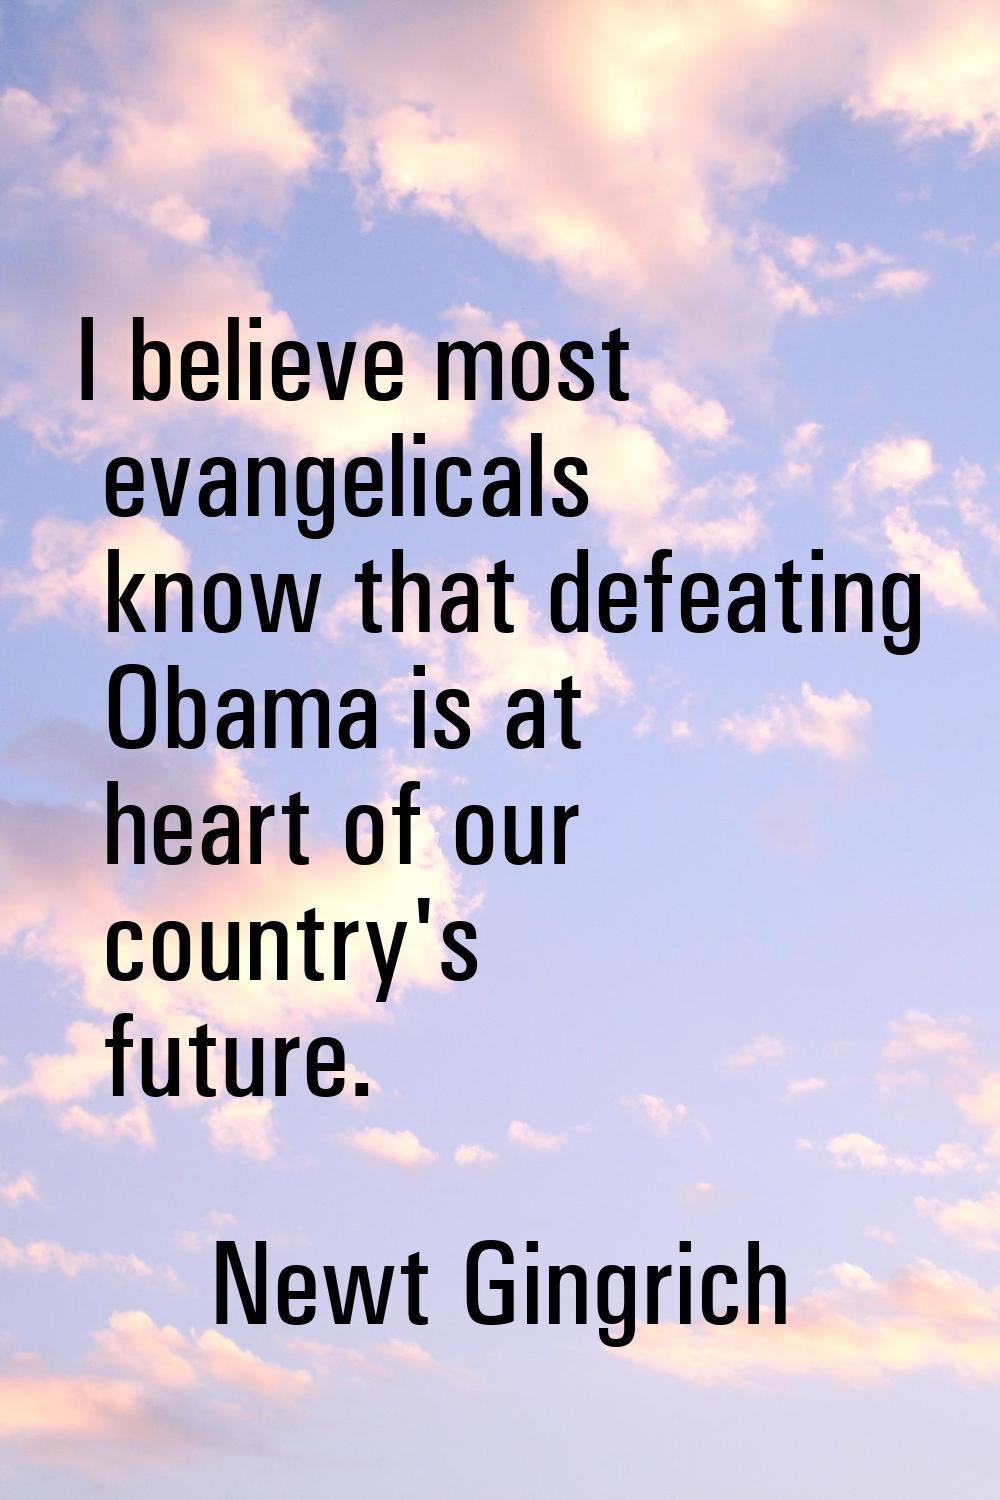 I believe most evangelicals know that defeating Obama is at heart of our country's future.